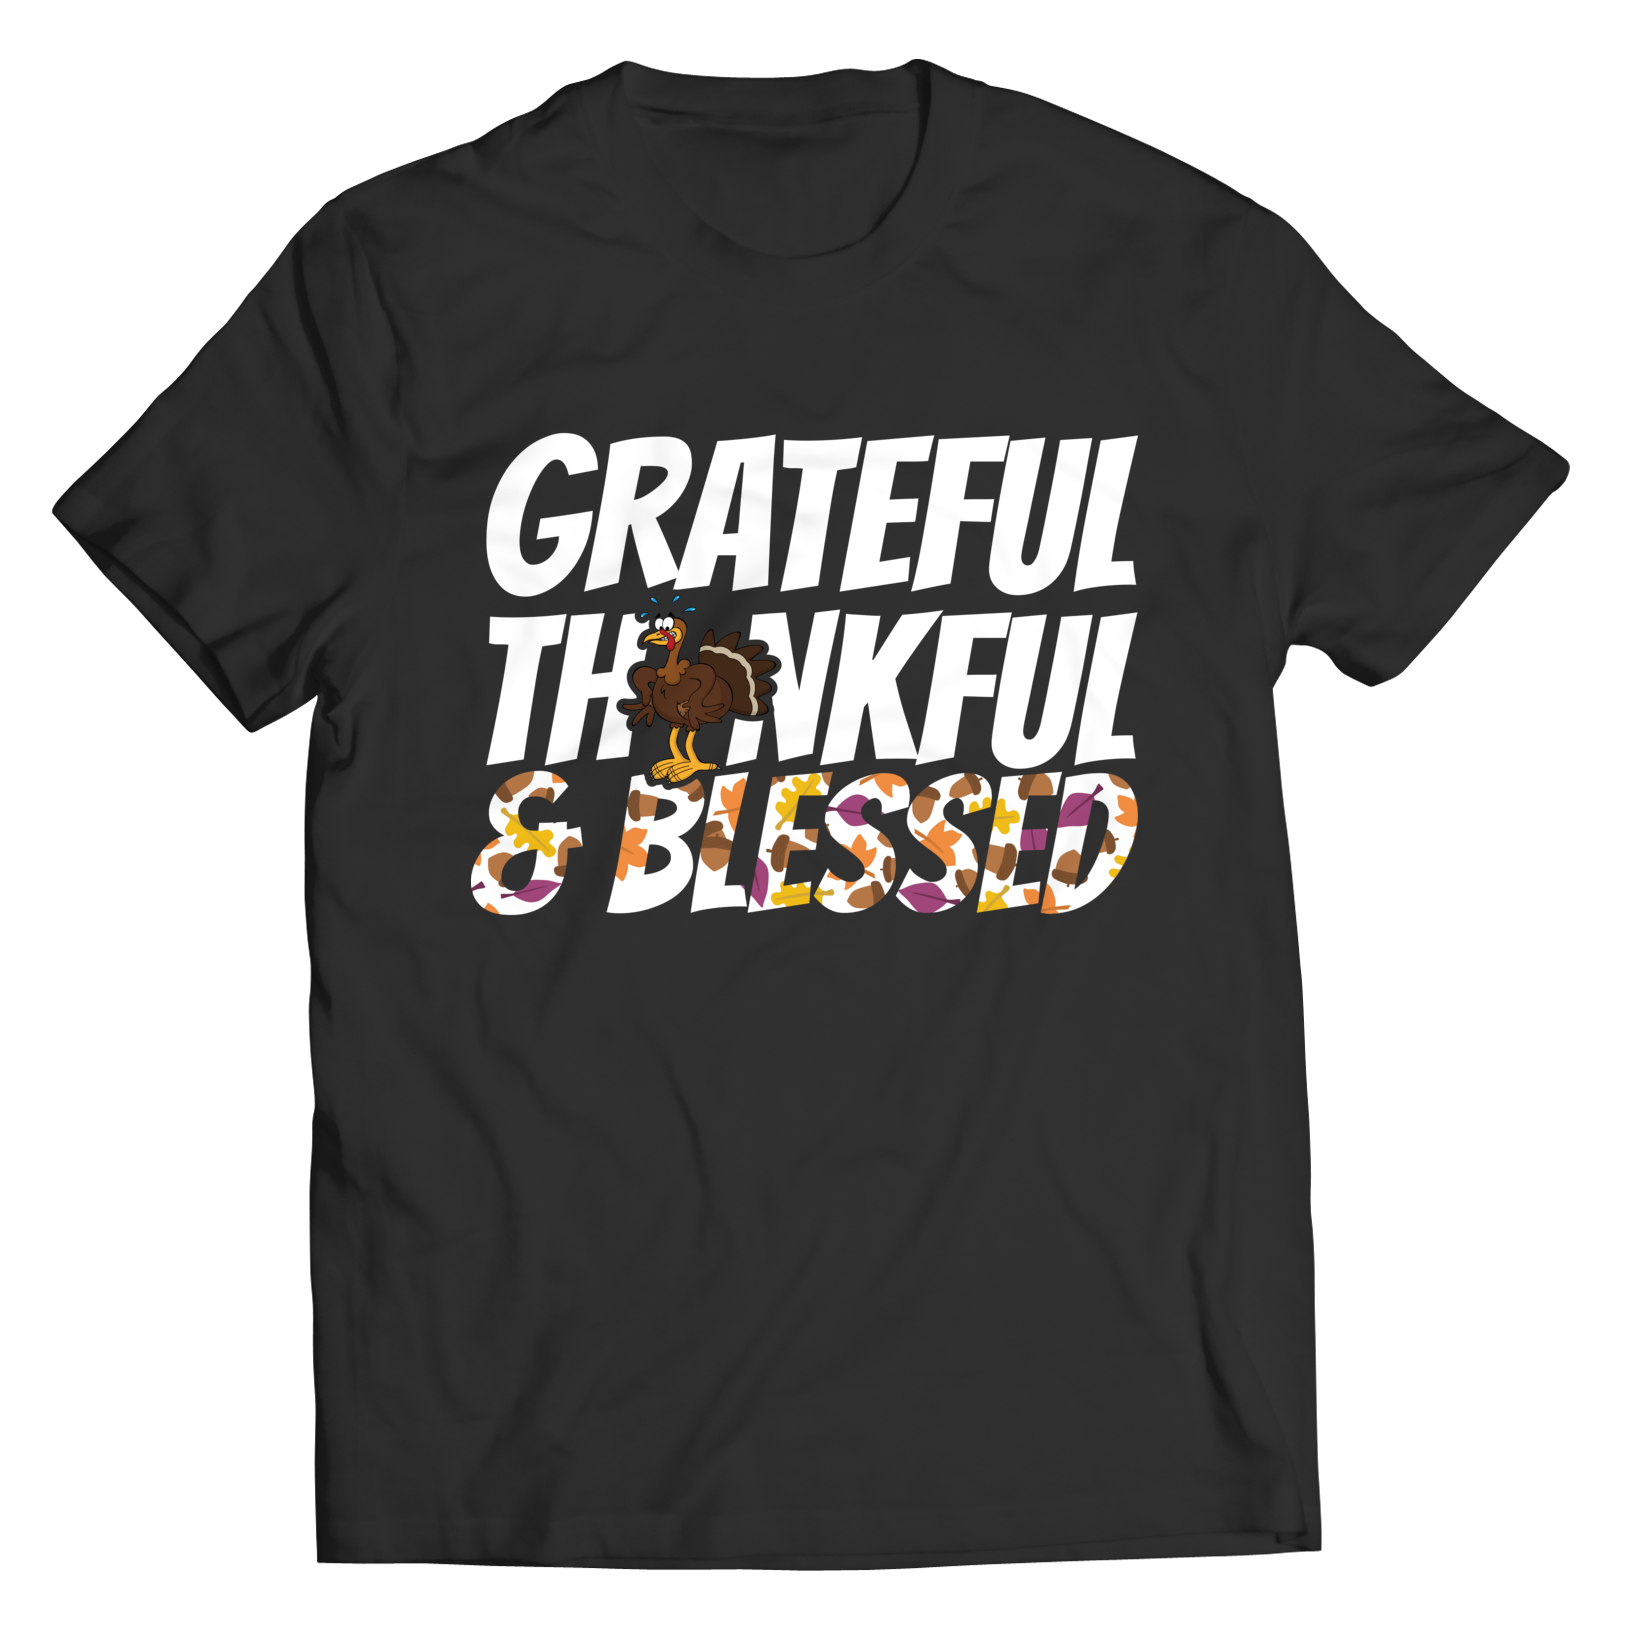 Thanksgiving - Grateful, Thankful, Blessed with Turkey - Shirt